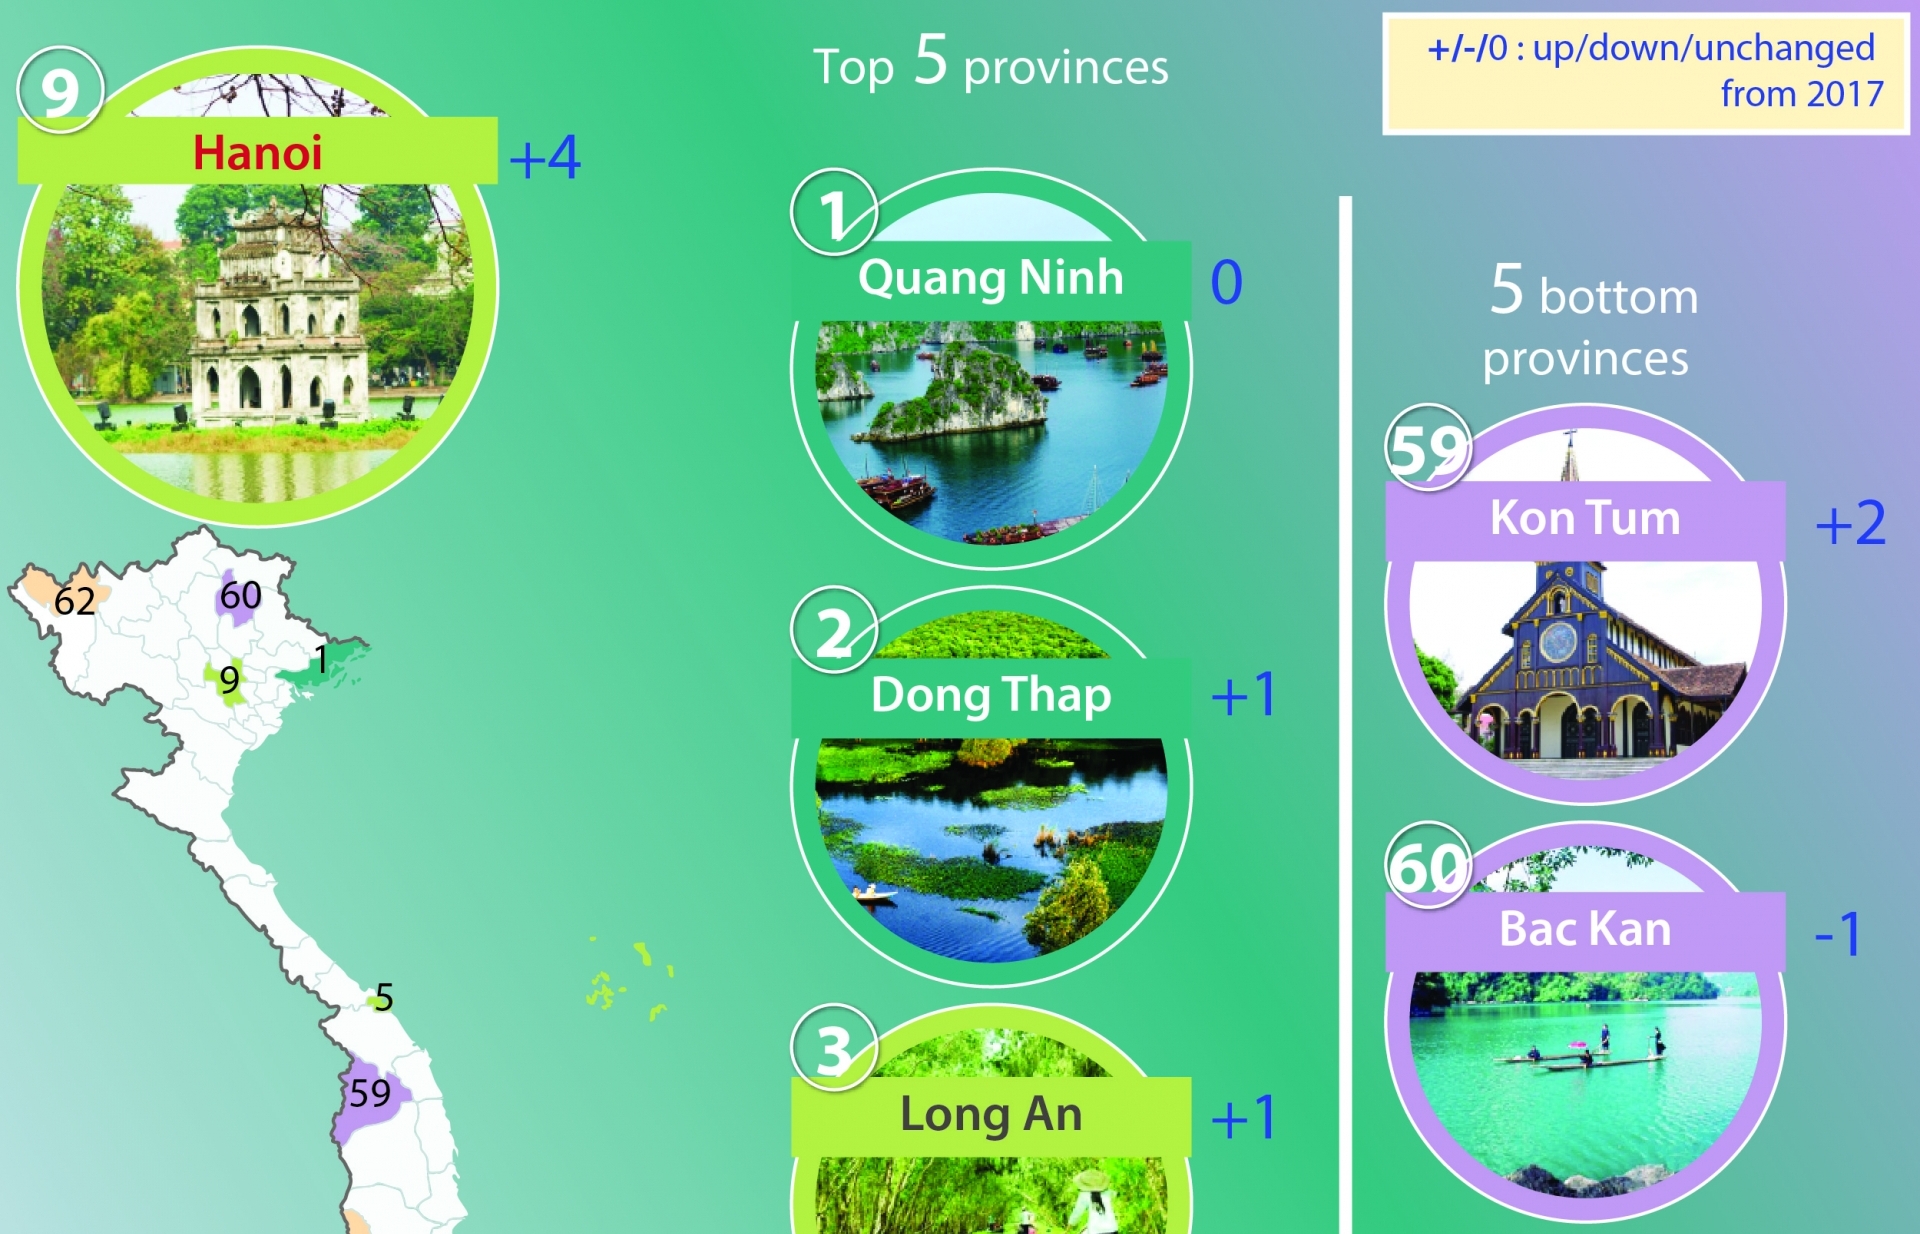 Quang Ninh retains top place in PCI ranking